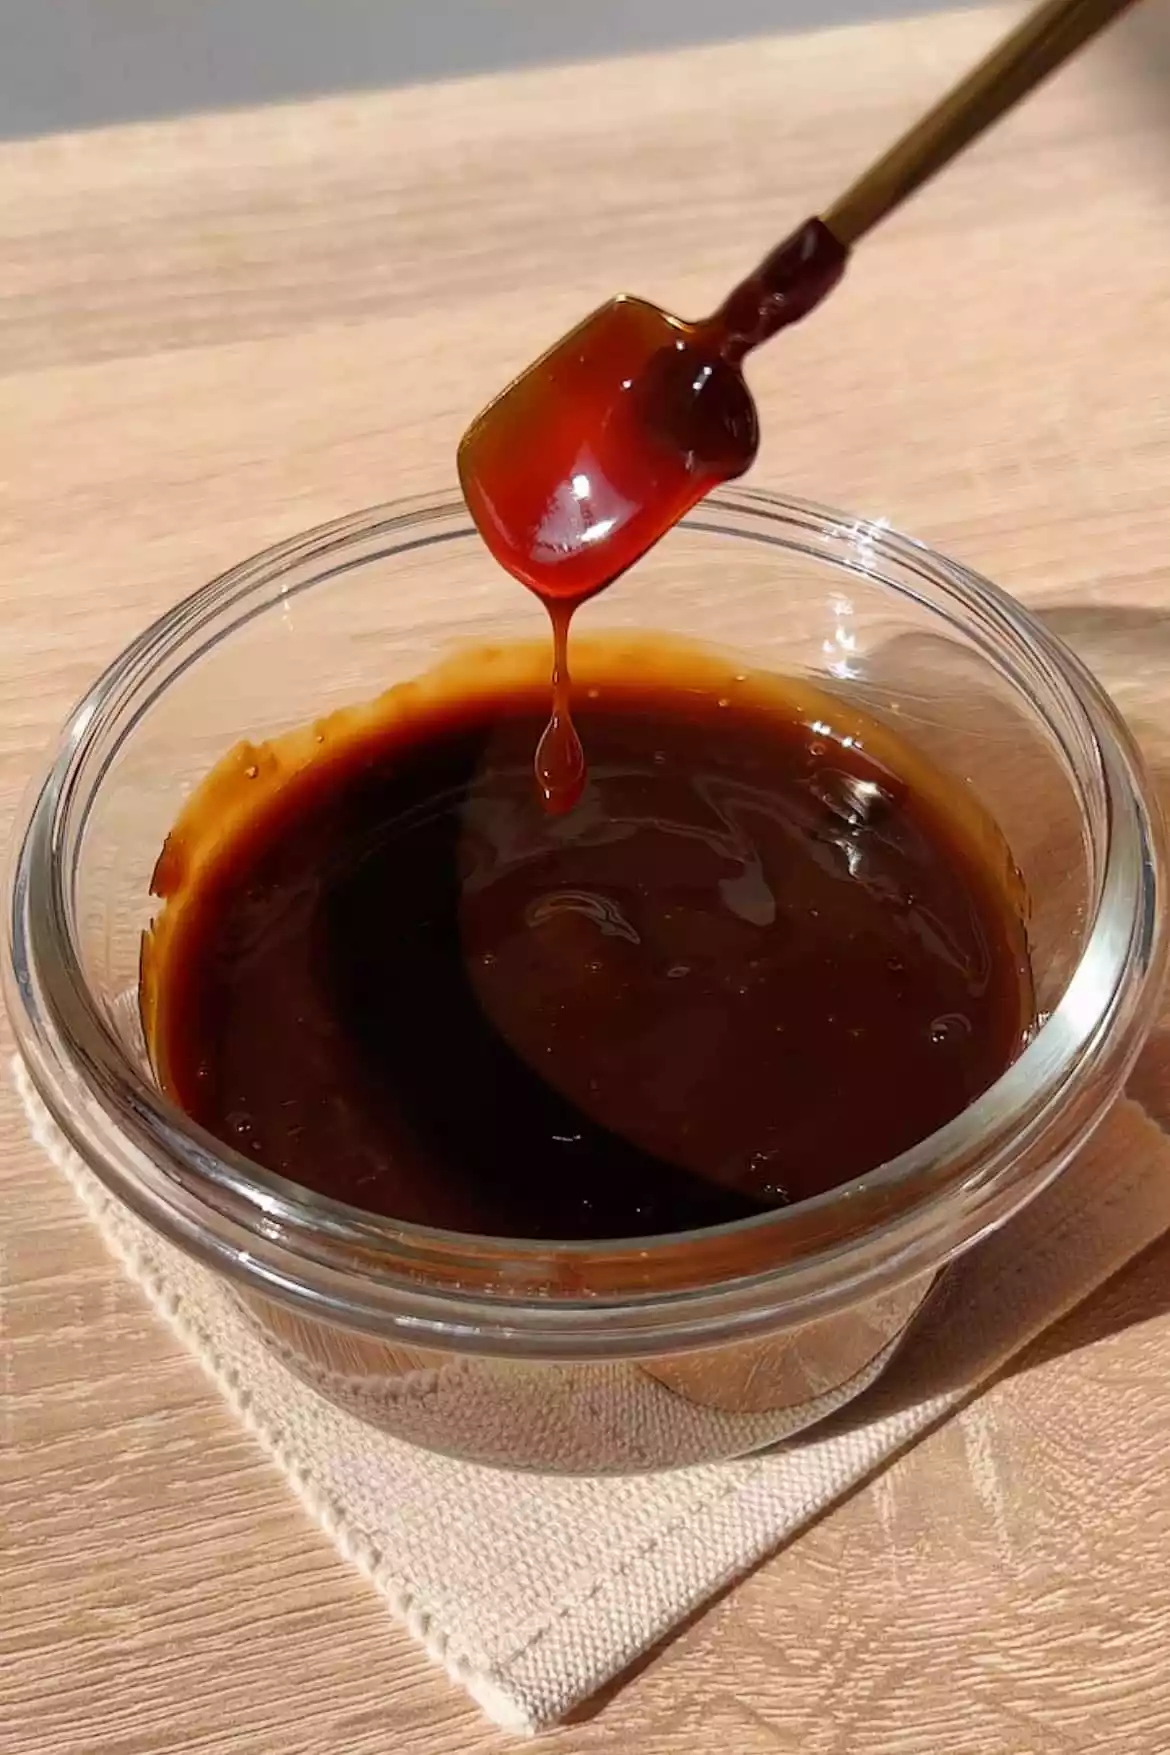 Process of Oyster Sauce